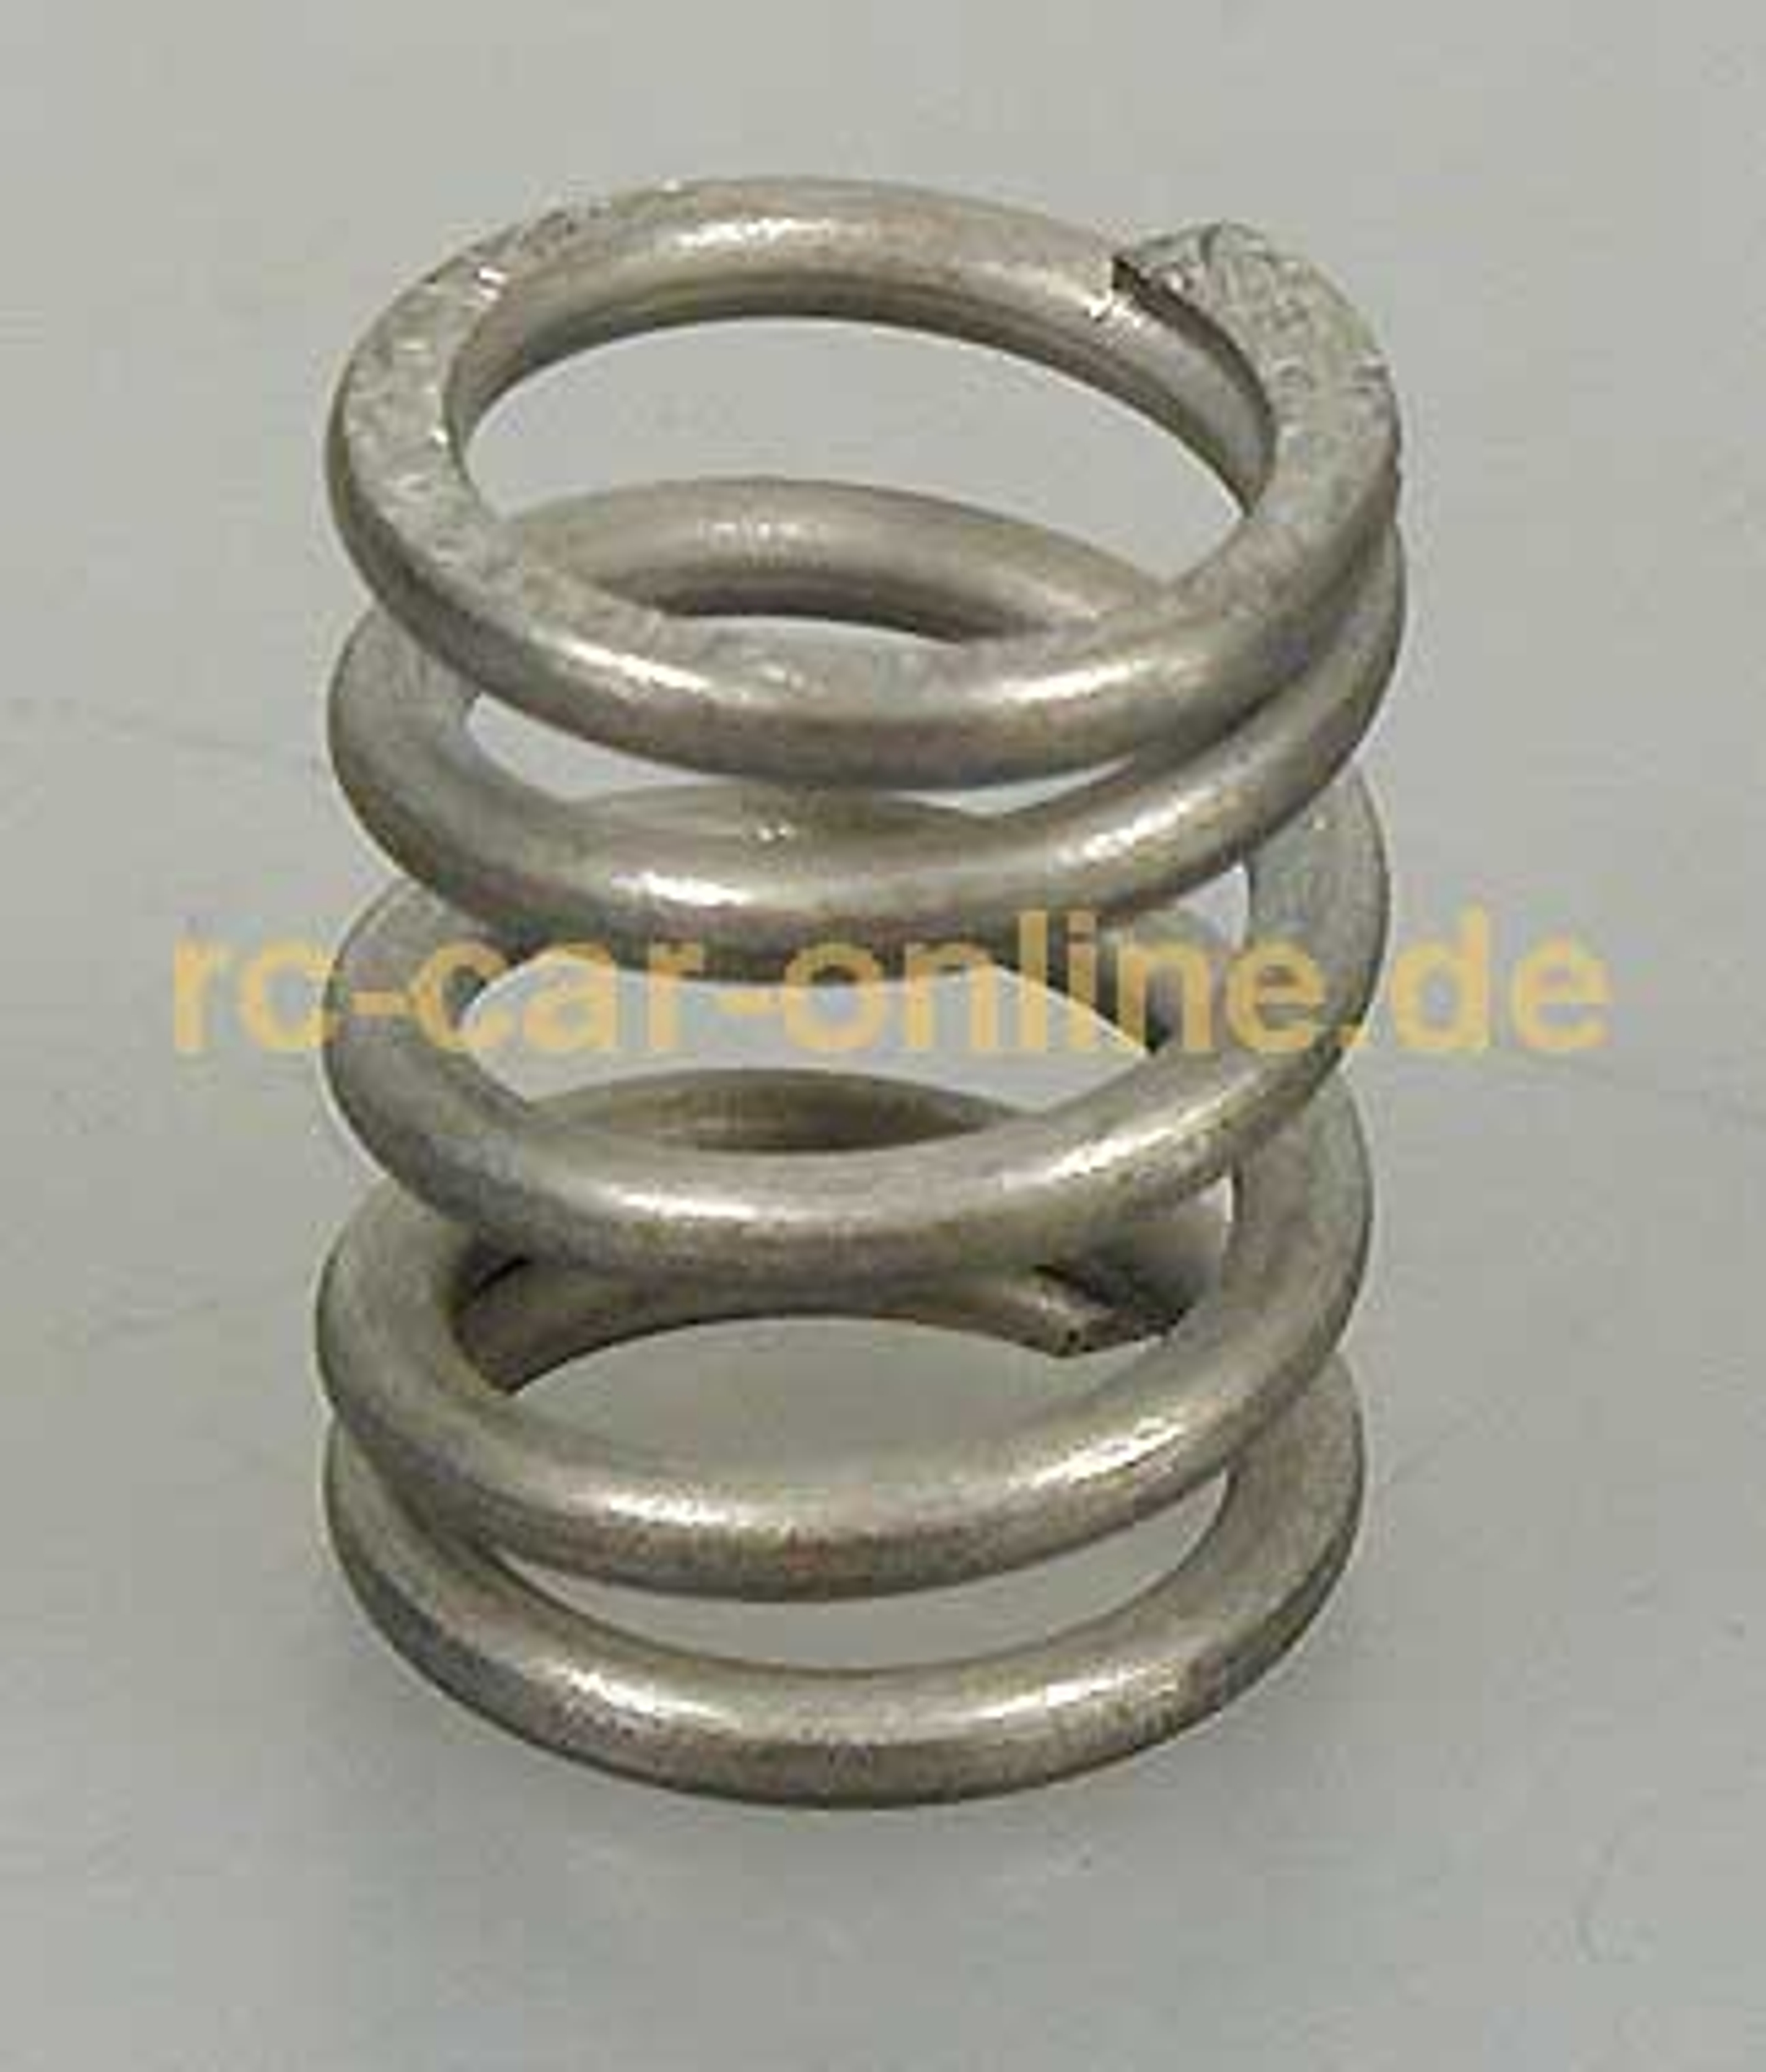 18410F, elcon servo saver replacement spring, soft, 1 pce.